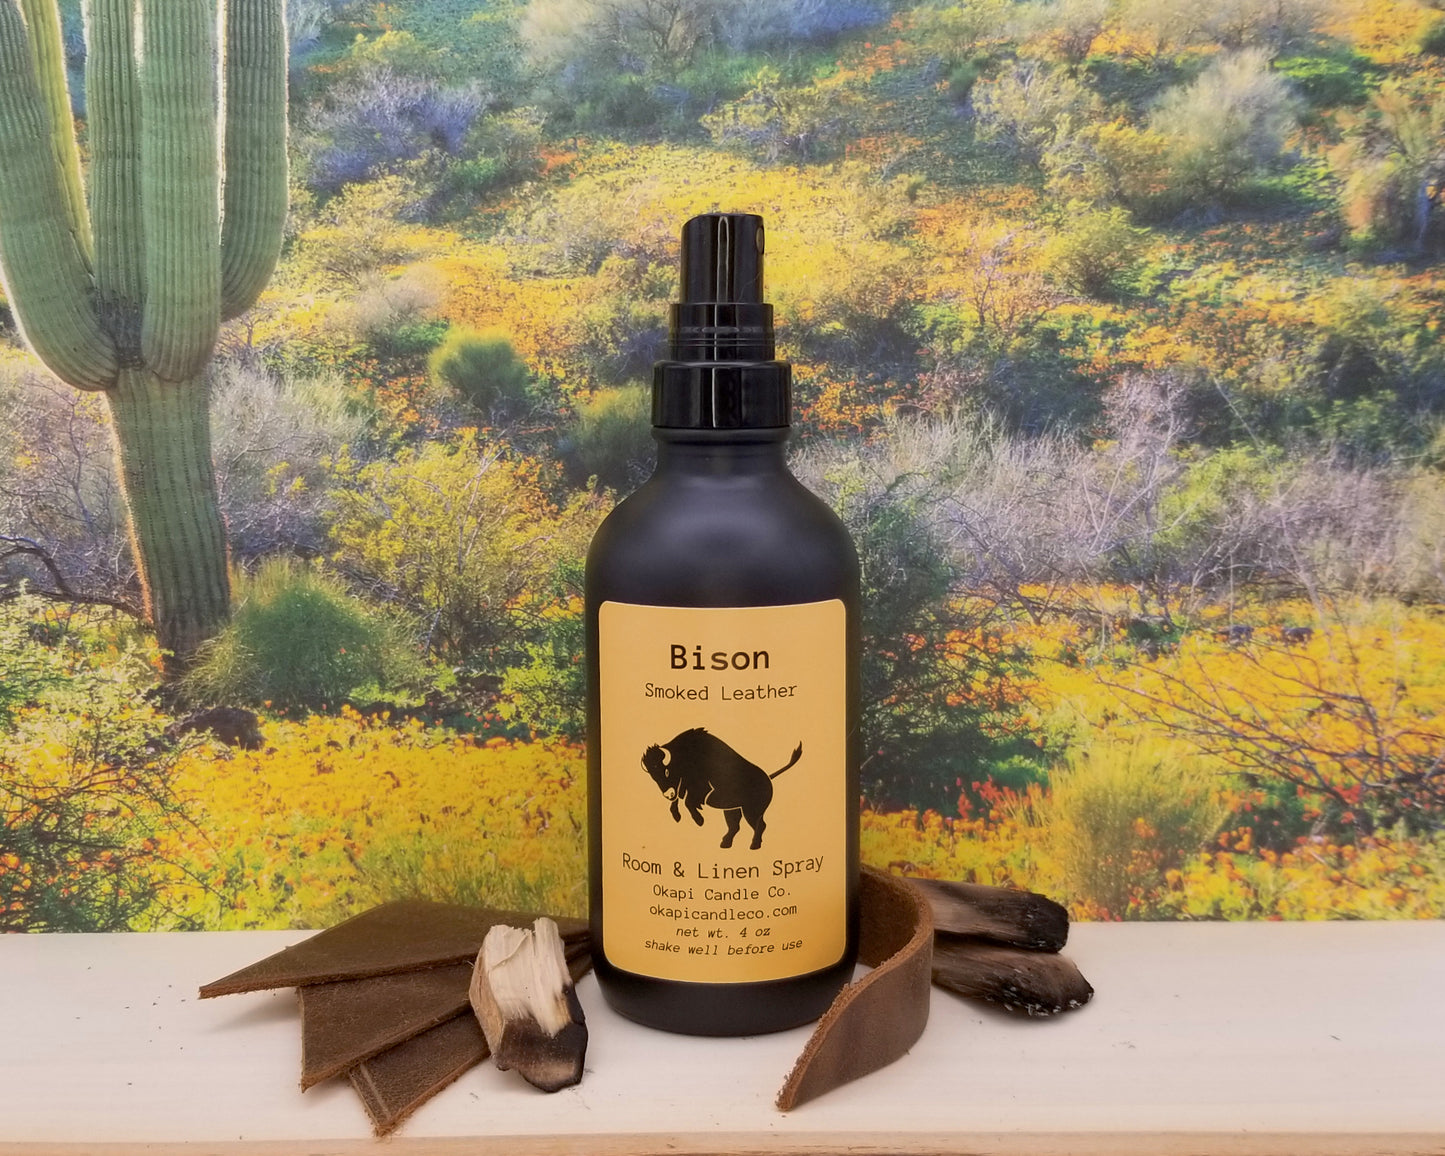 Bison Room, Linen & Car Spray - Smoked Leather Fragrance